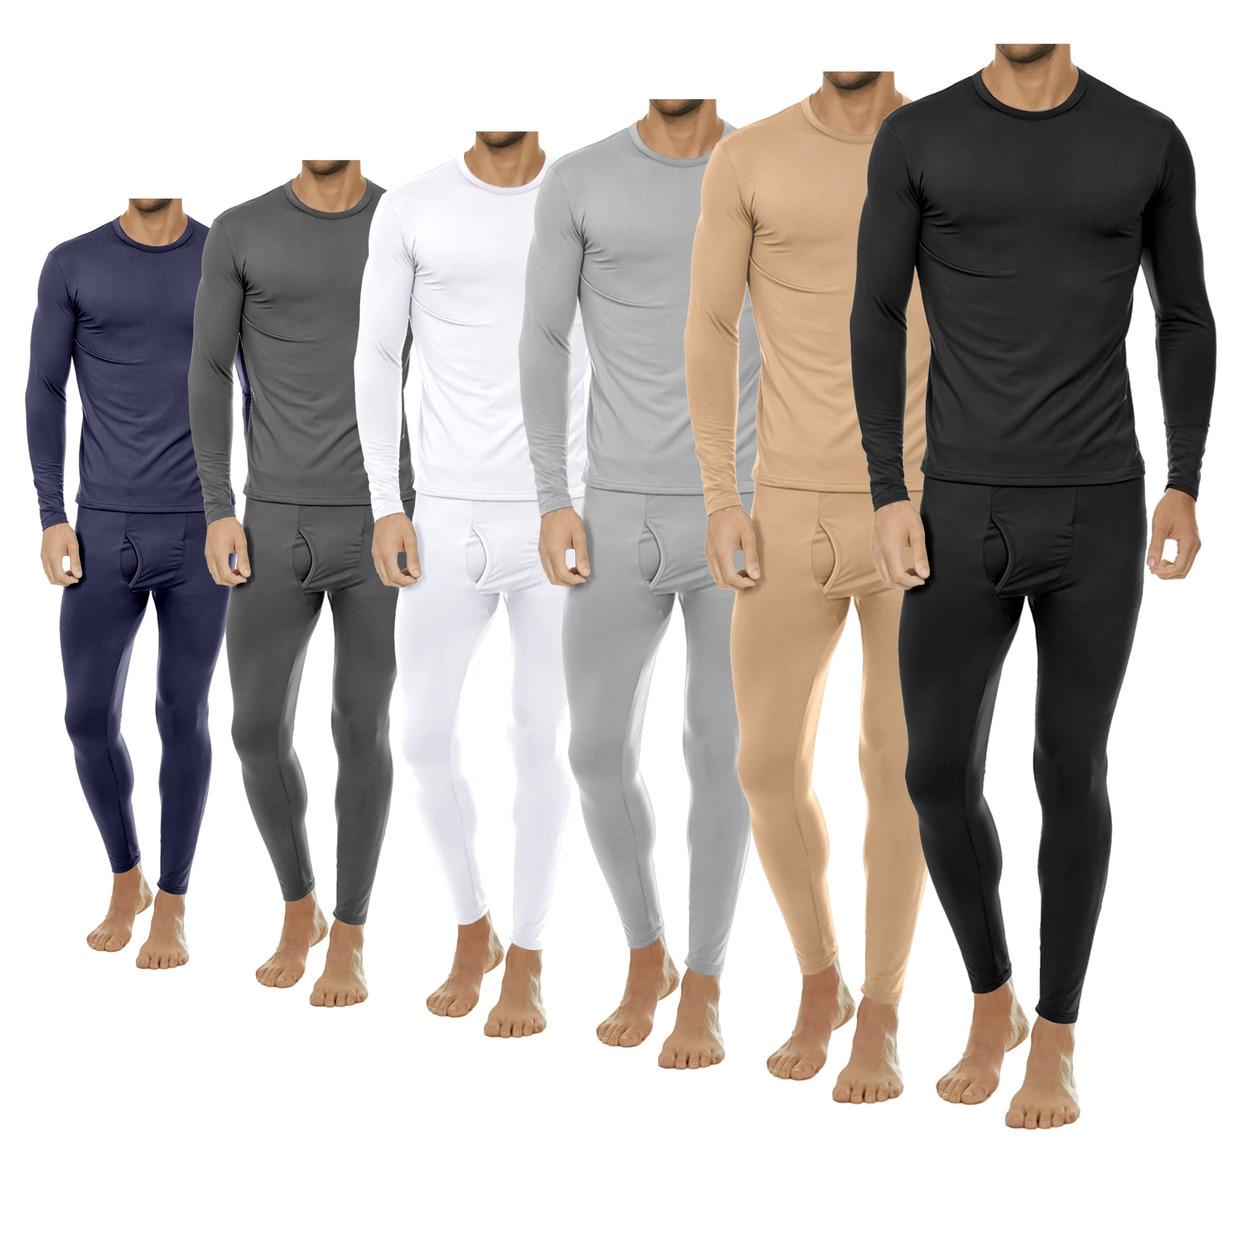 2-Pieces: Men's Winter Warm Fleece Lined Thermal Underwear Set For Cold Weather - Navy, Small